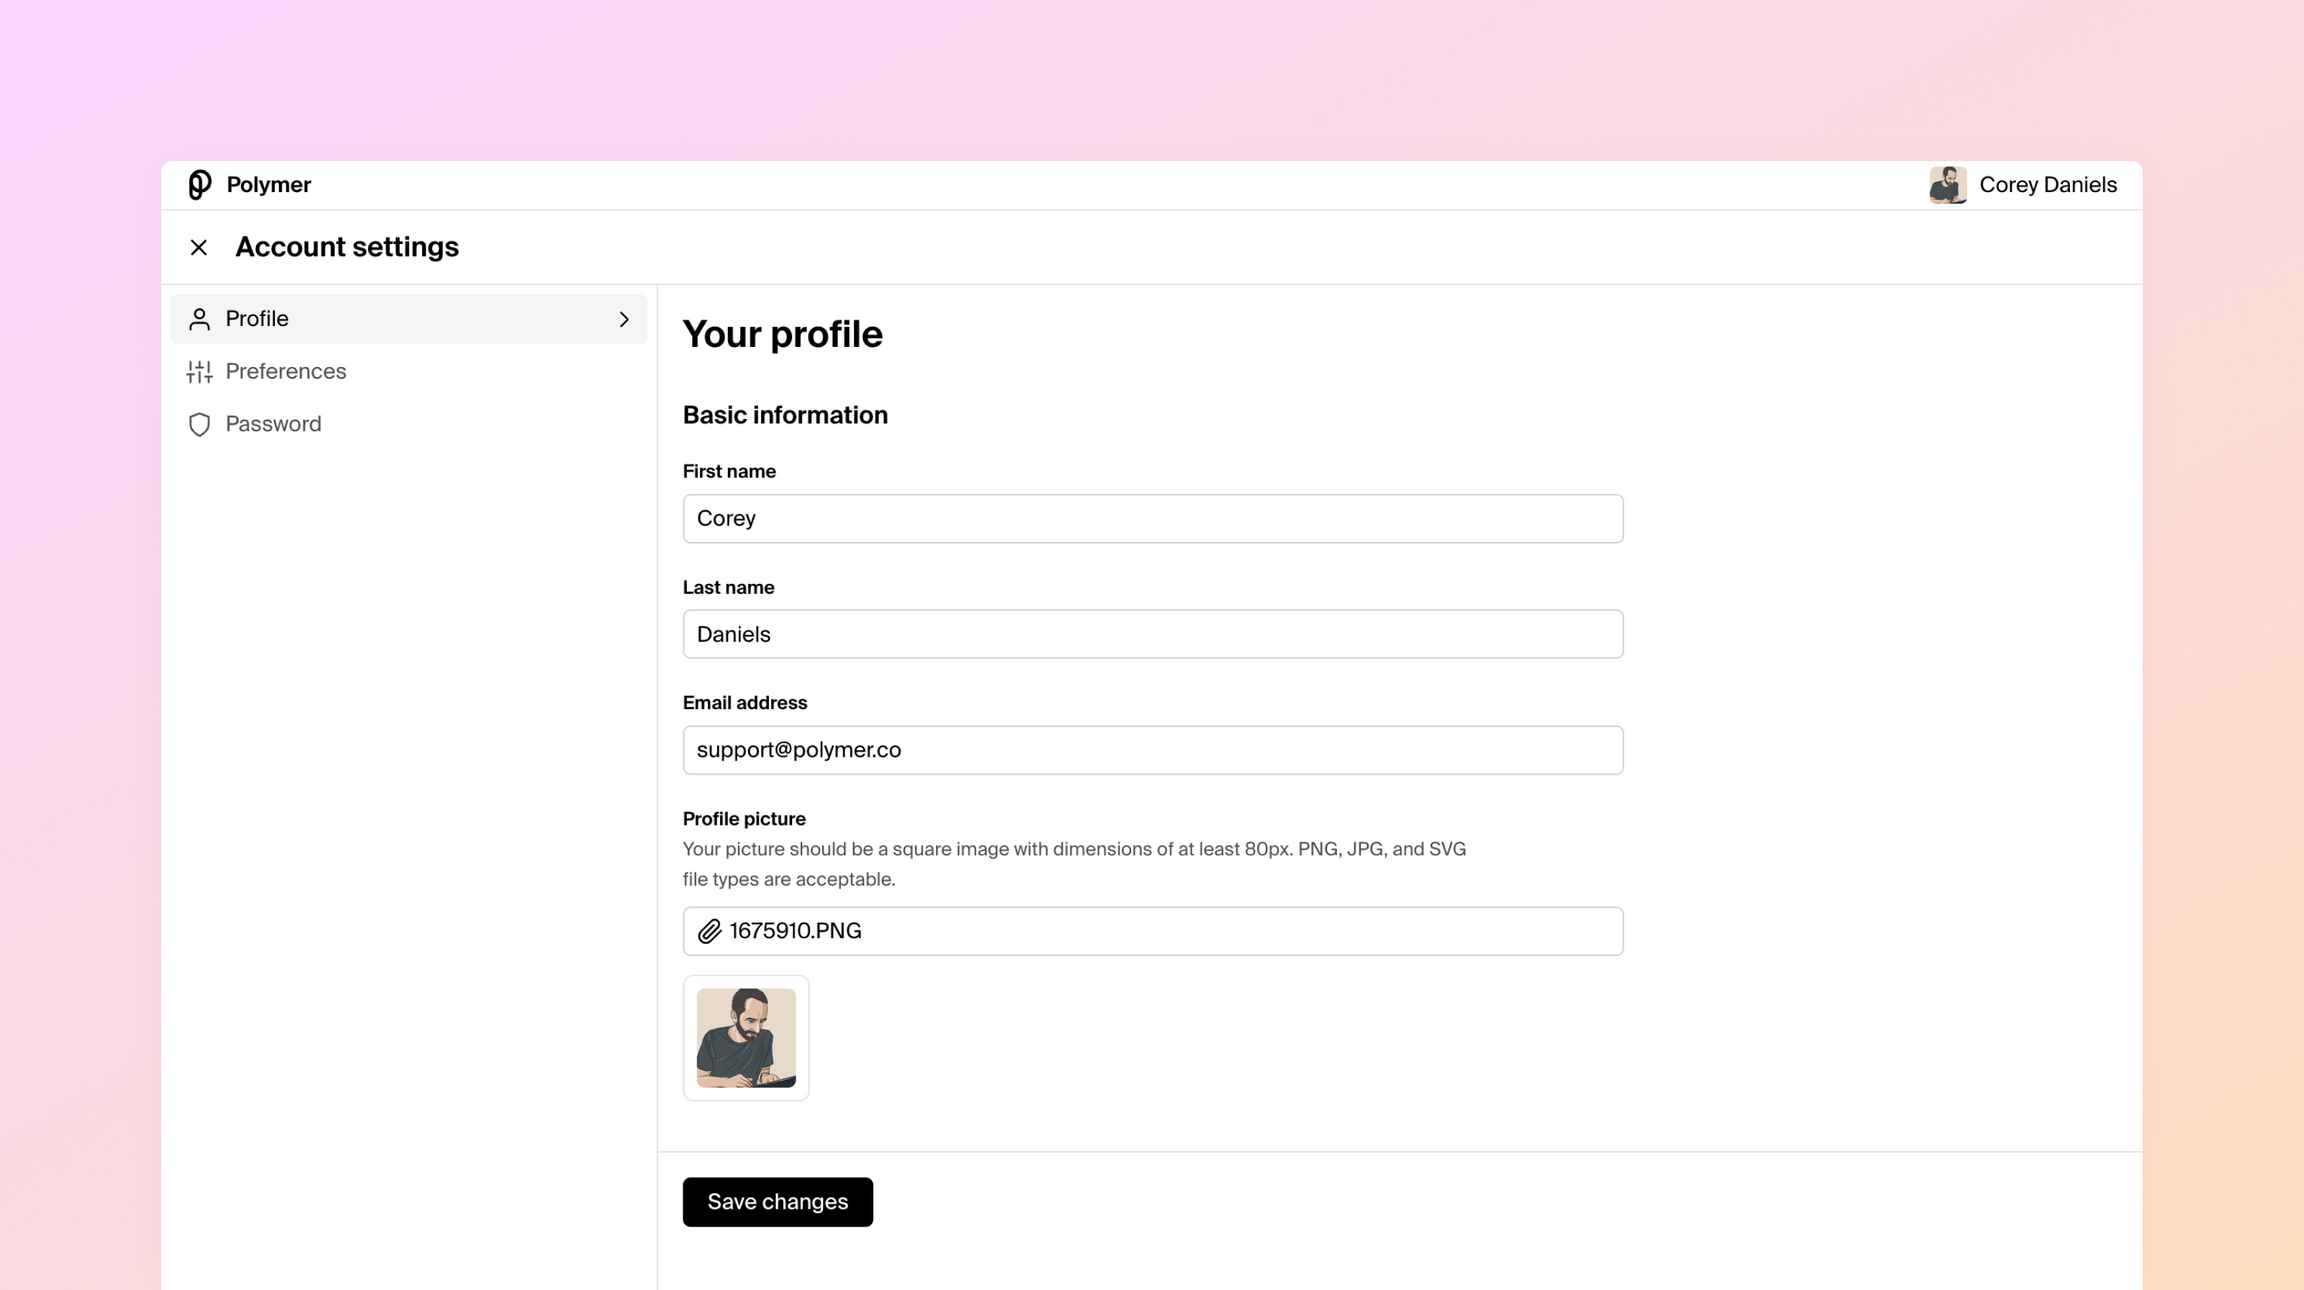 The Polymer profile page section within user account settings